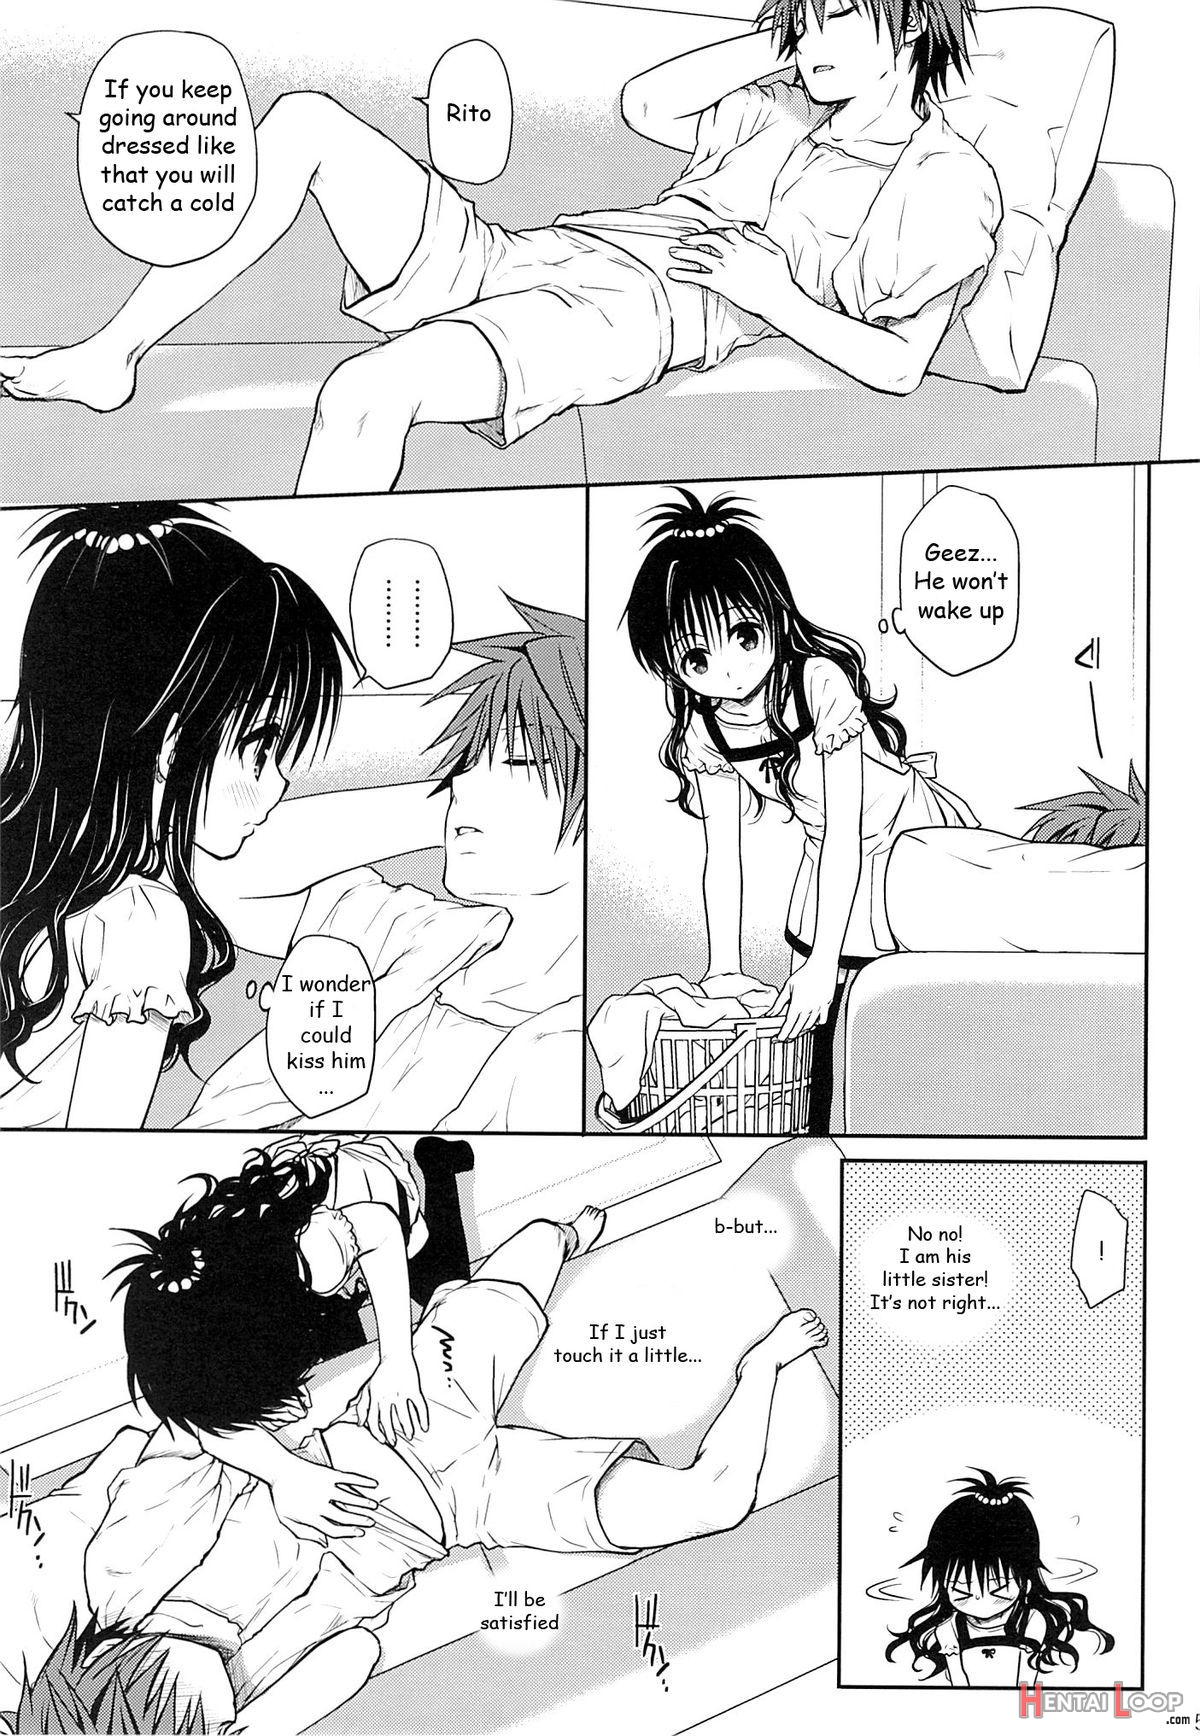 Very Ripe Mikan Skillfully Innocent page 4